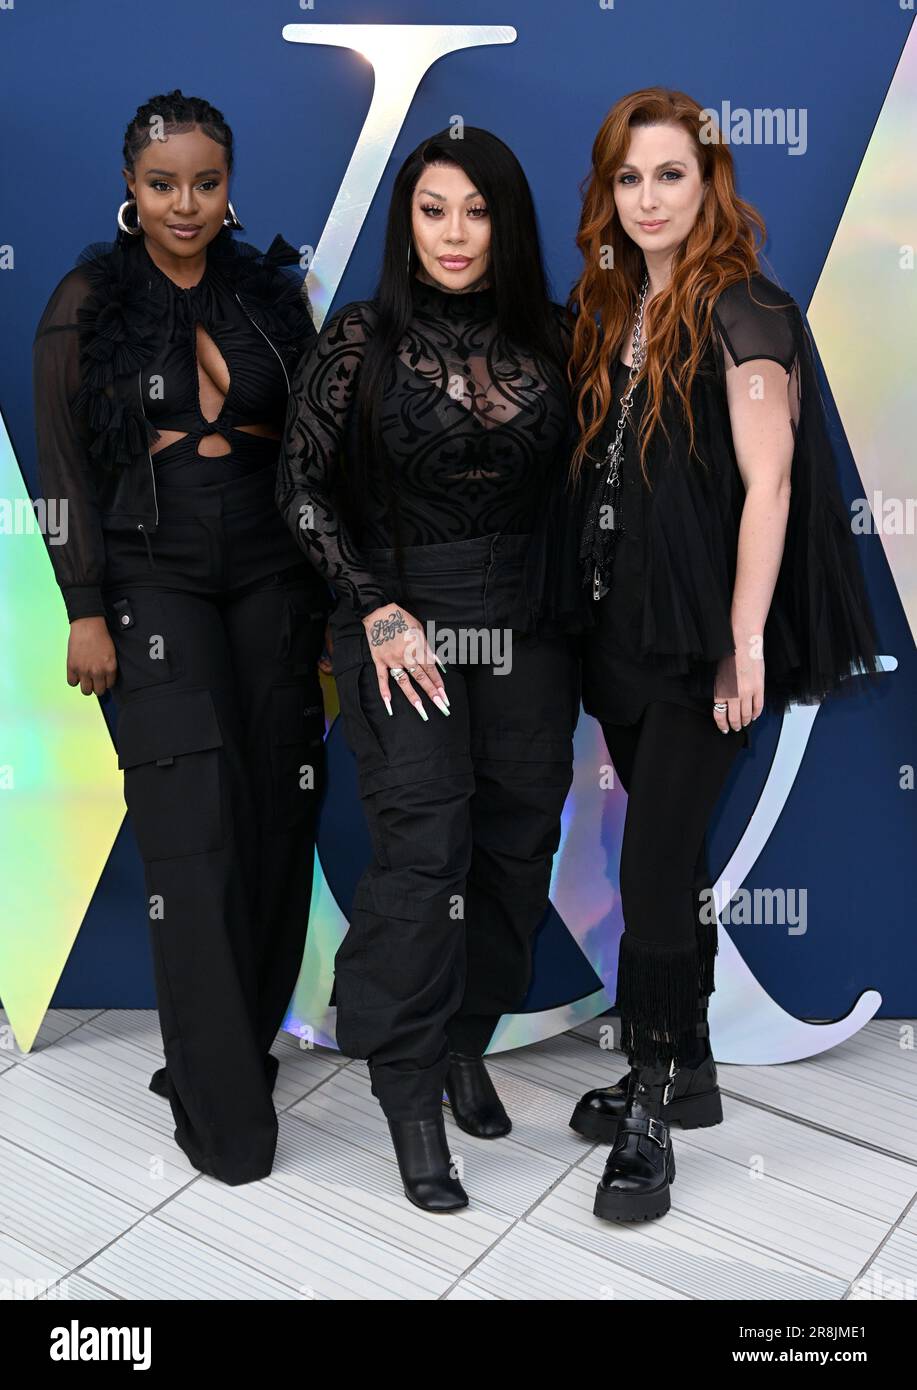 London, UK. 21st June, 2023. London, UK. June 21st, 2023. Keisha Buchanan, Mutya Buena and Siobh‡n Donaghy from The Sugababes at the V&A Summer Party, Victoria and Albert Museum. Credit: Doug Peters/Alamy Live News Stock Photo